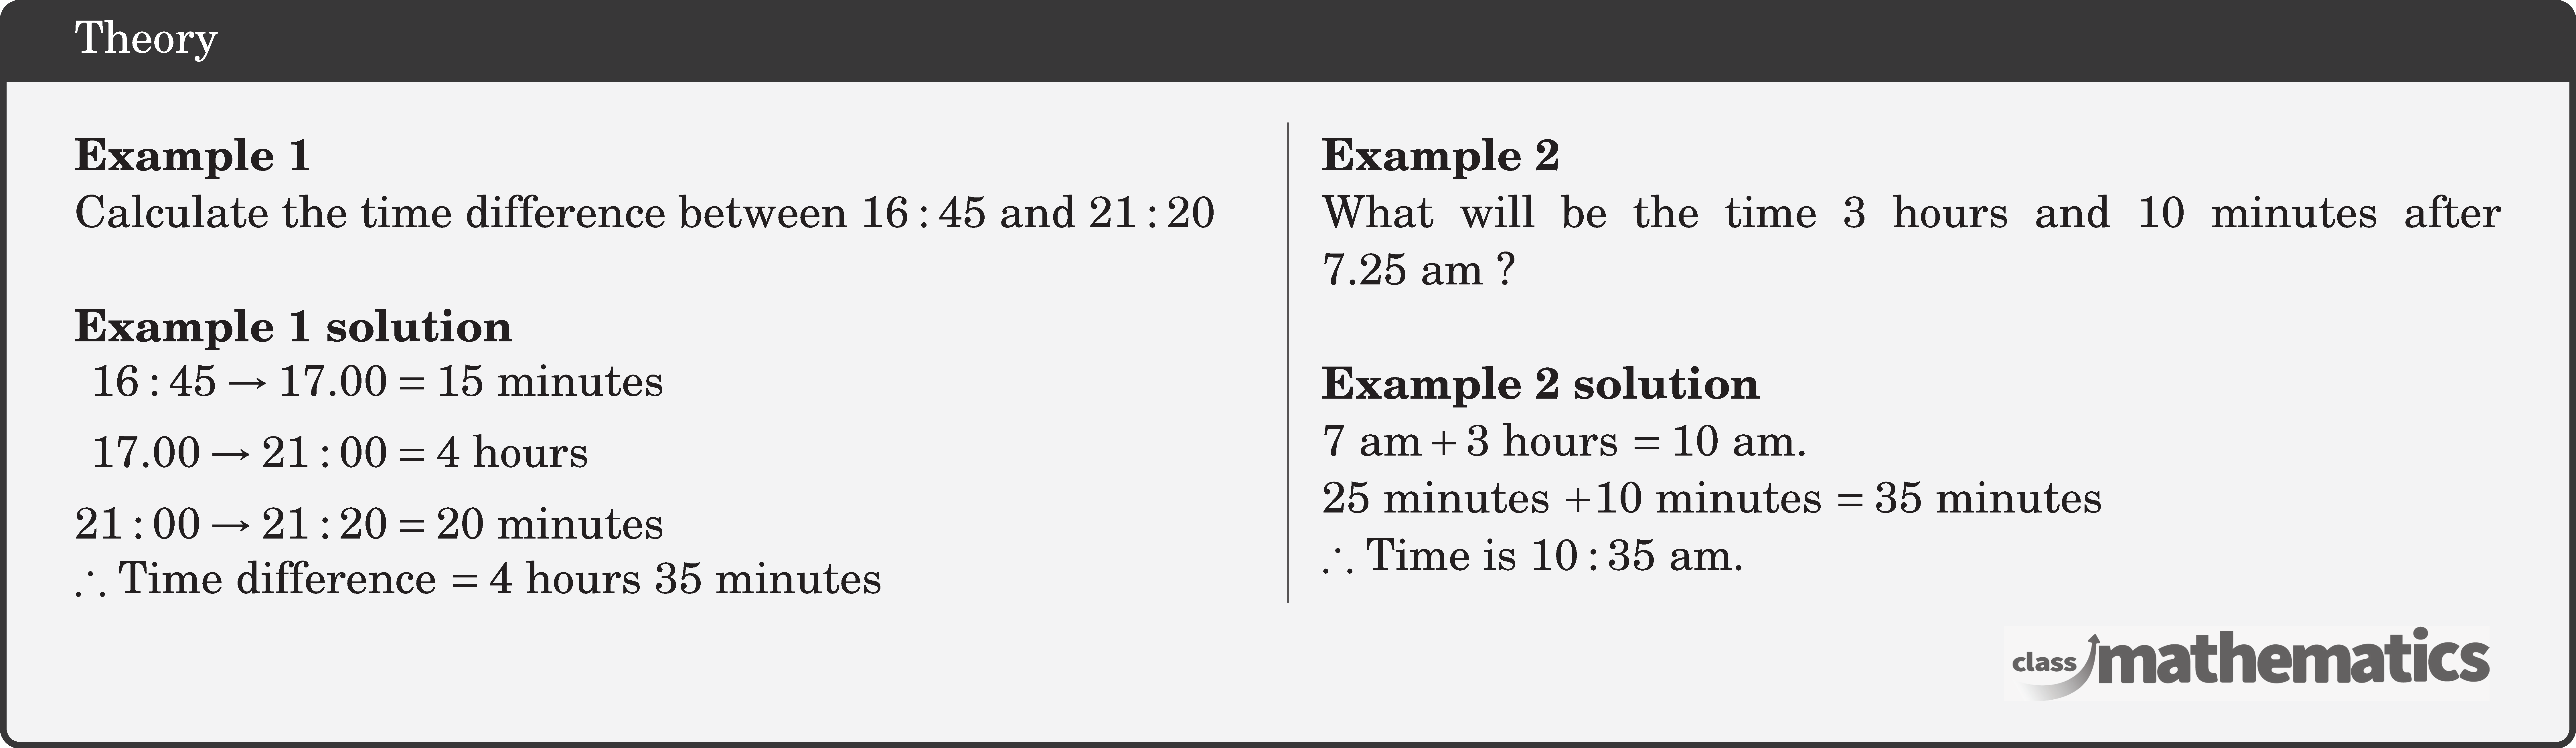 \begin{multicols}{2}  \textbf{Example 1}\\ Calculate the time difference between \(16: 45\) and \(21:20\)\\  \textbf{Example 1 solution}\\ \(\begin{aligned} 16: 45 \rightarrow 17.00&=15 \text { minutes } \\ 17.00 \rightarrow 21: 00&=4 \text { hours } \\ 21: 00 \rightarrow 21: 20&=20 \text { minutes } \end{aligned}\)\\ \(\therefore\) Time difference \(=4\) hours \(35\) minutes  \columnbreak \textbf{Example 2}\\ What will be the time 3 hours and 10 minutes after \(7.25 \text{ am}\) ?\\  \textbf{Example 2 solution}\\ \(7 \text{ am}+3\) hours \(=10 \text{ am}\).\\ \(25\) minutes \(+10\) minutes \(=35\) minutes\\ \(\therefore\) Time is \(10:35\) am. \end{multicols}